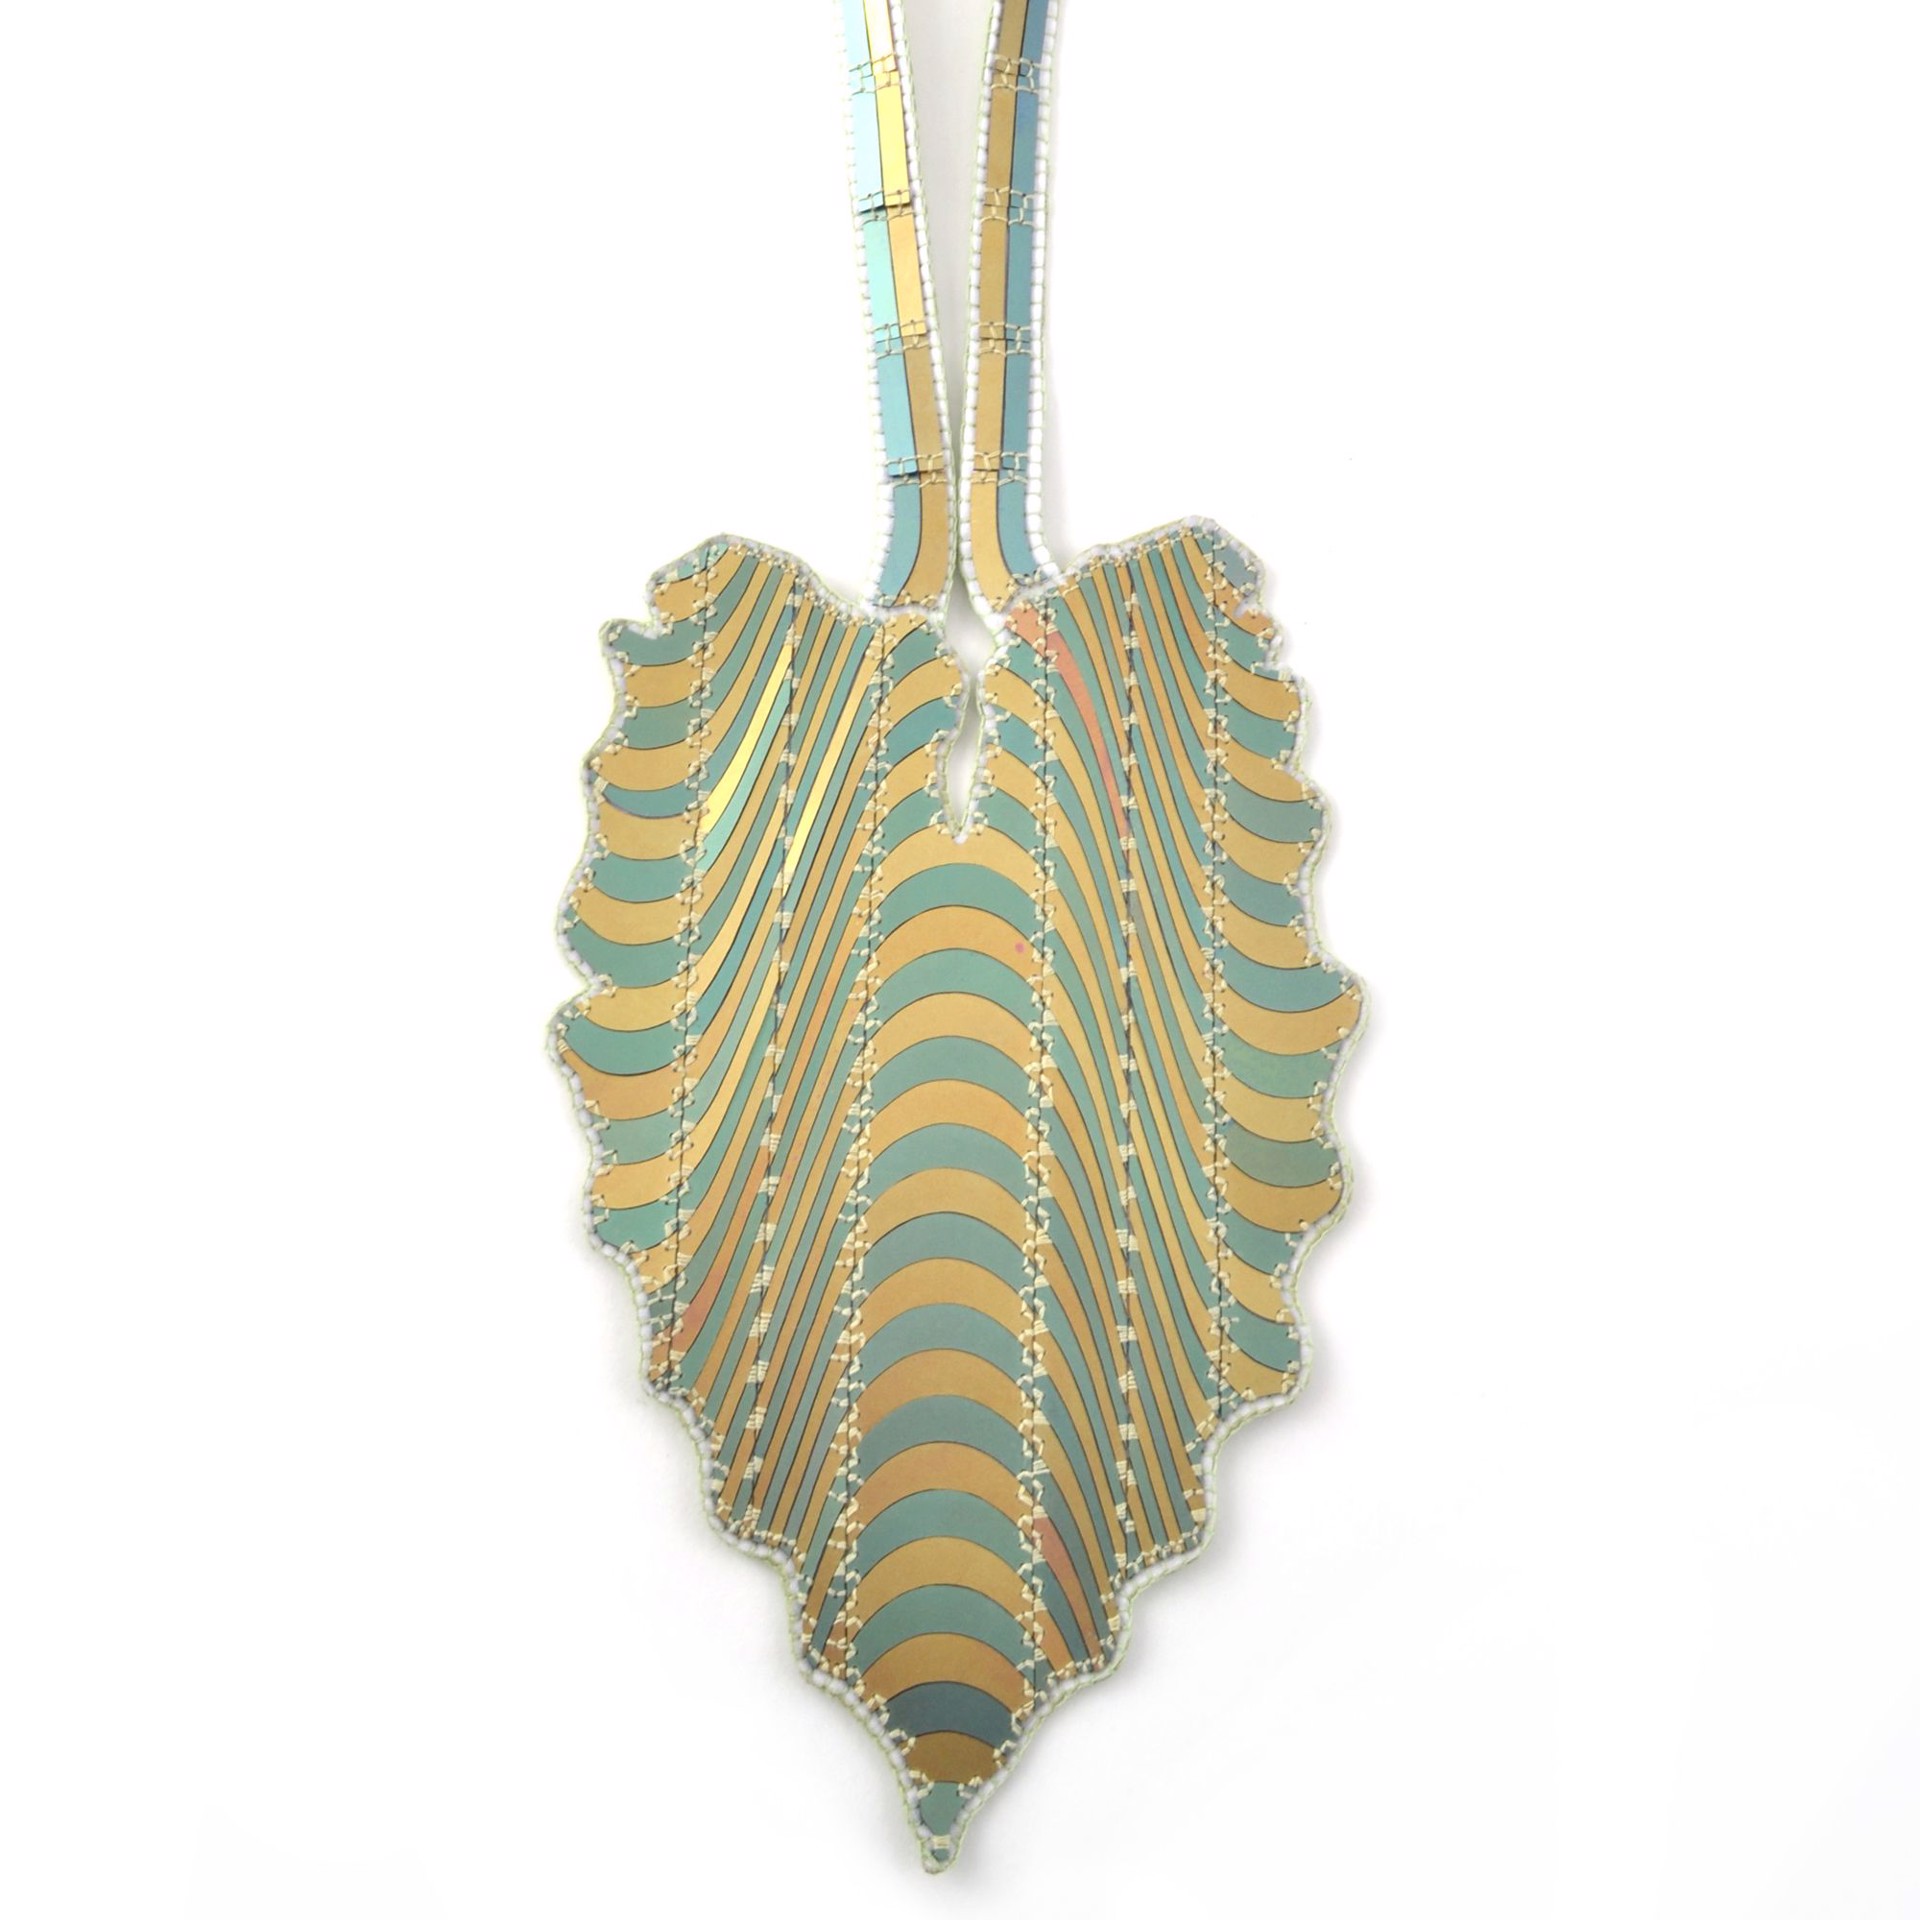 Optical Alocasia Necklace #2 by Mallory Weston